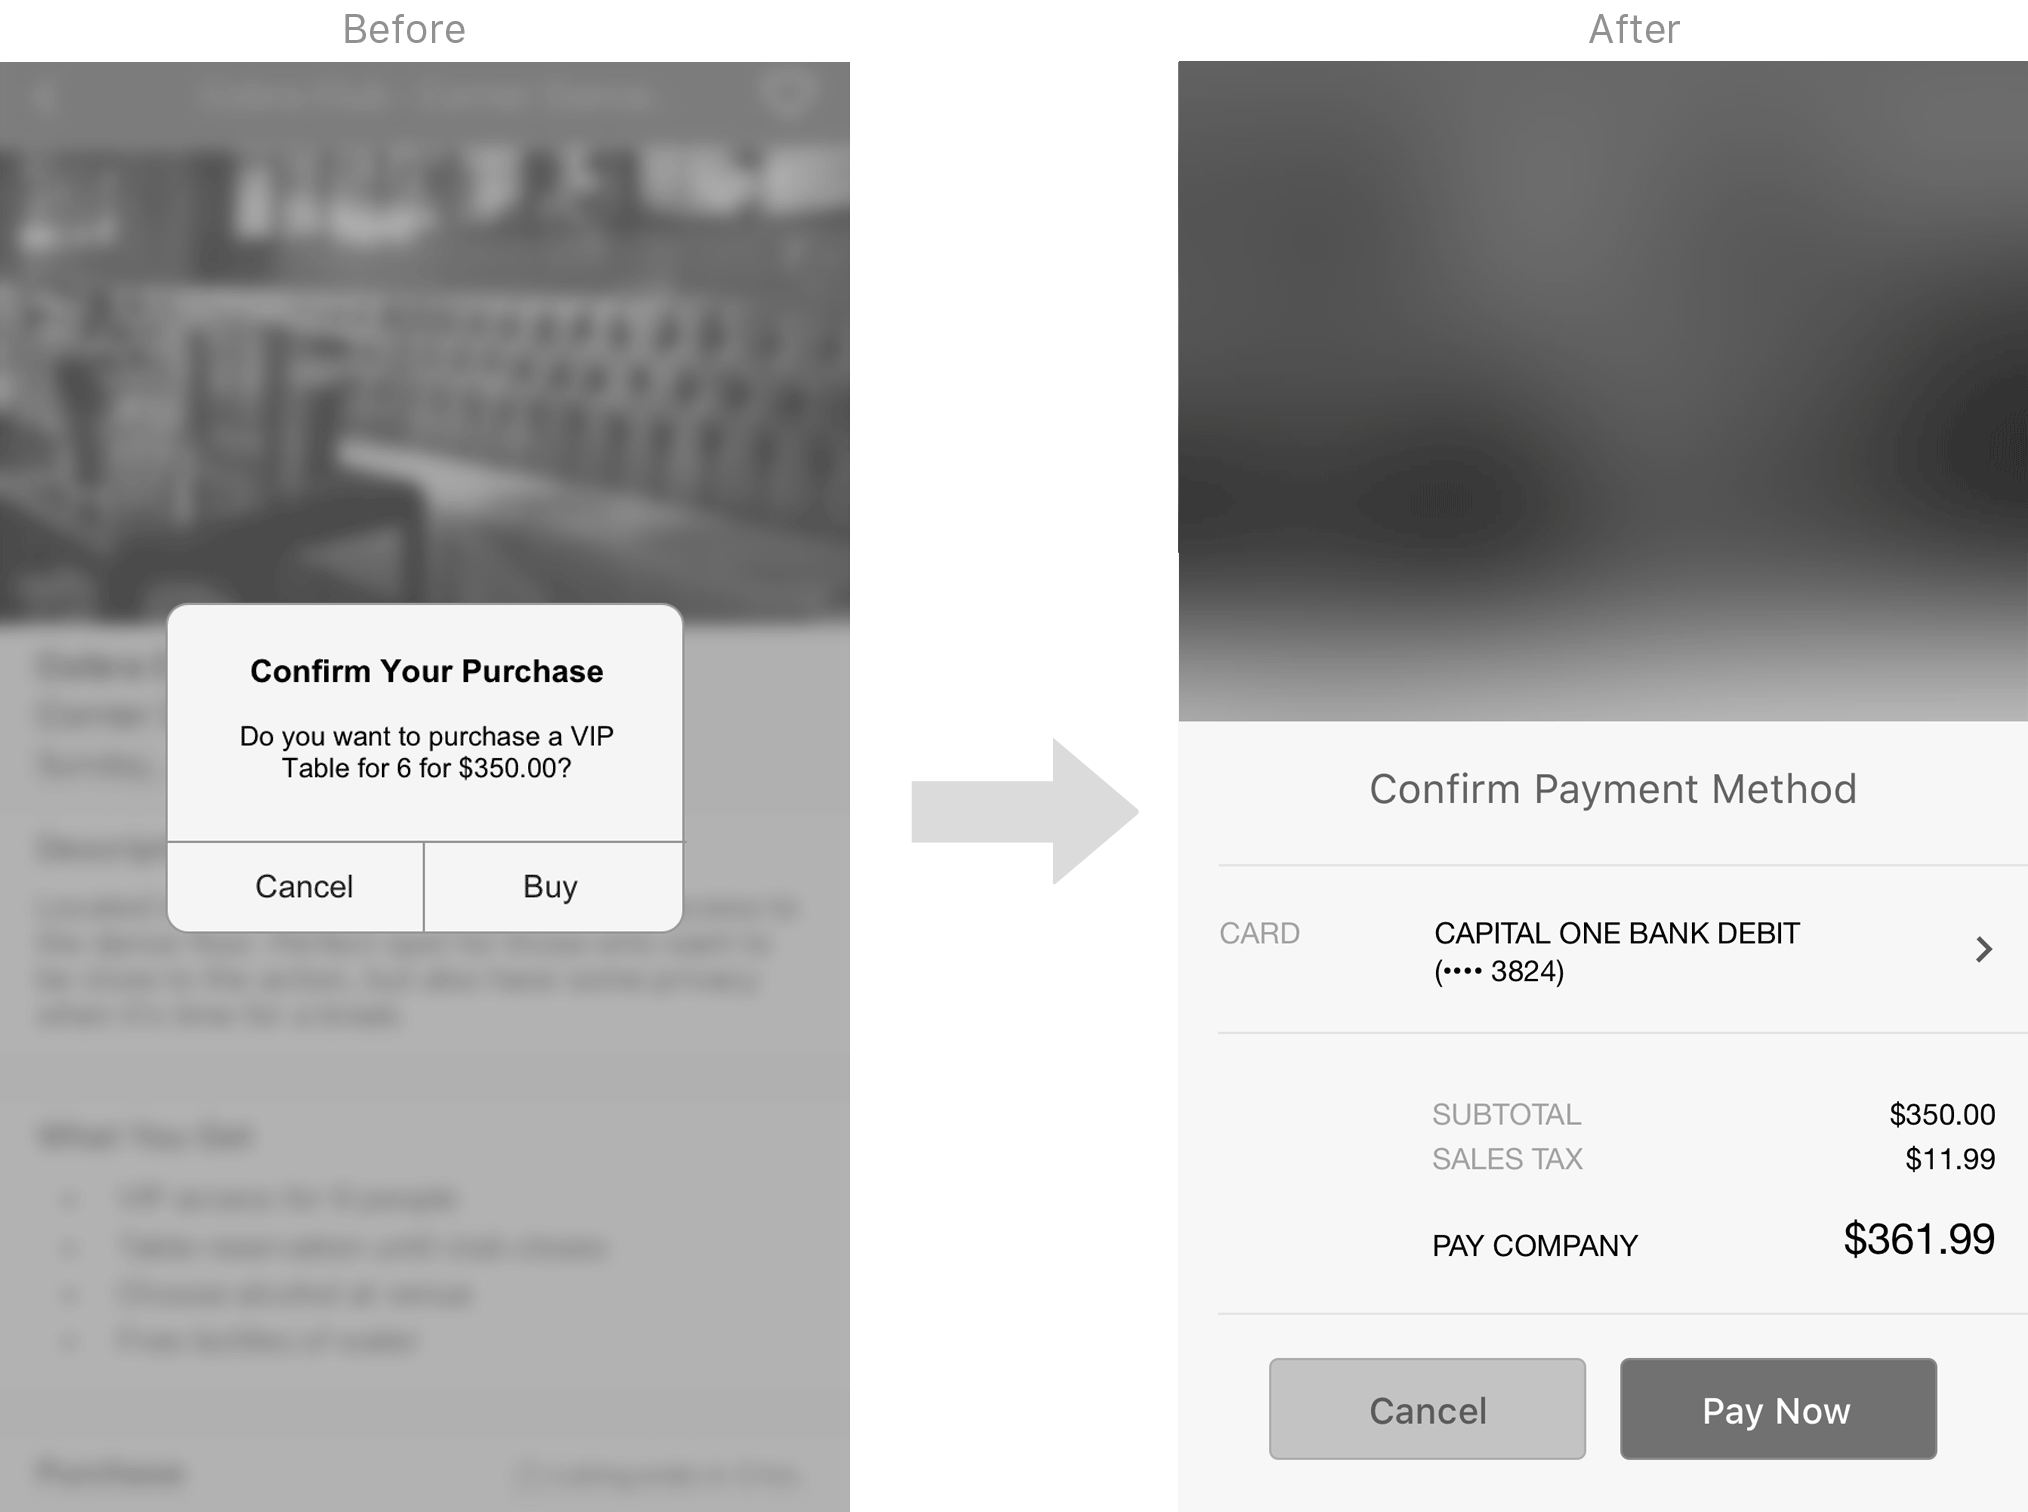 Confirm Payment Method - Before and After